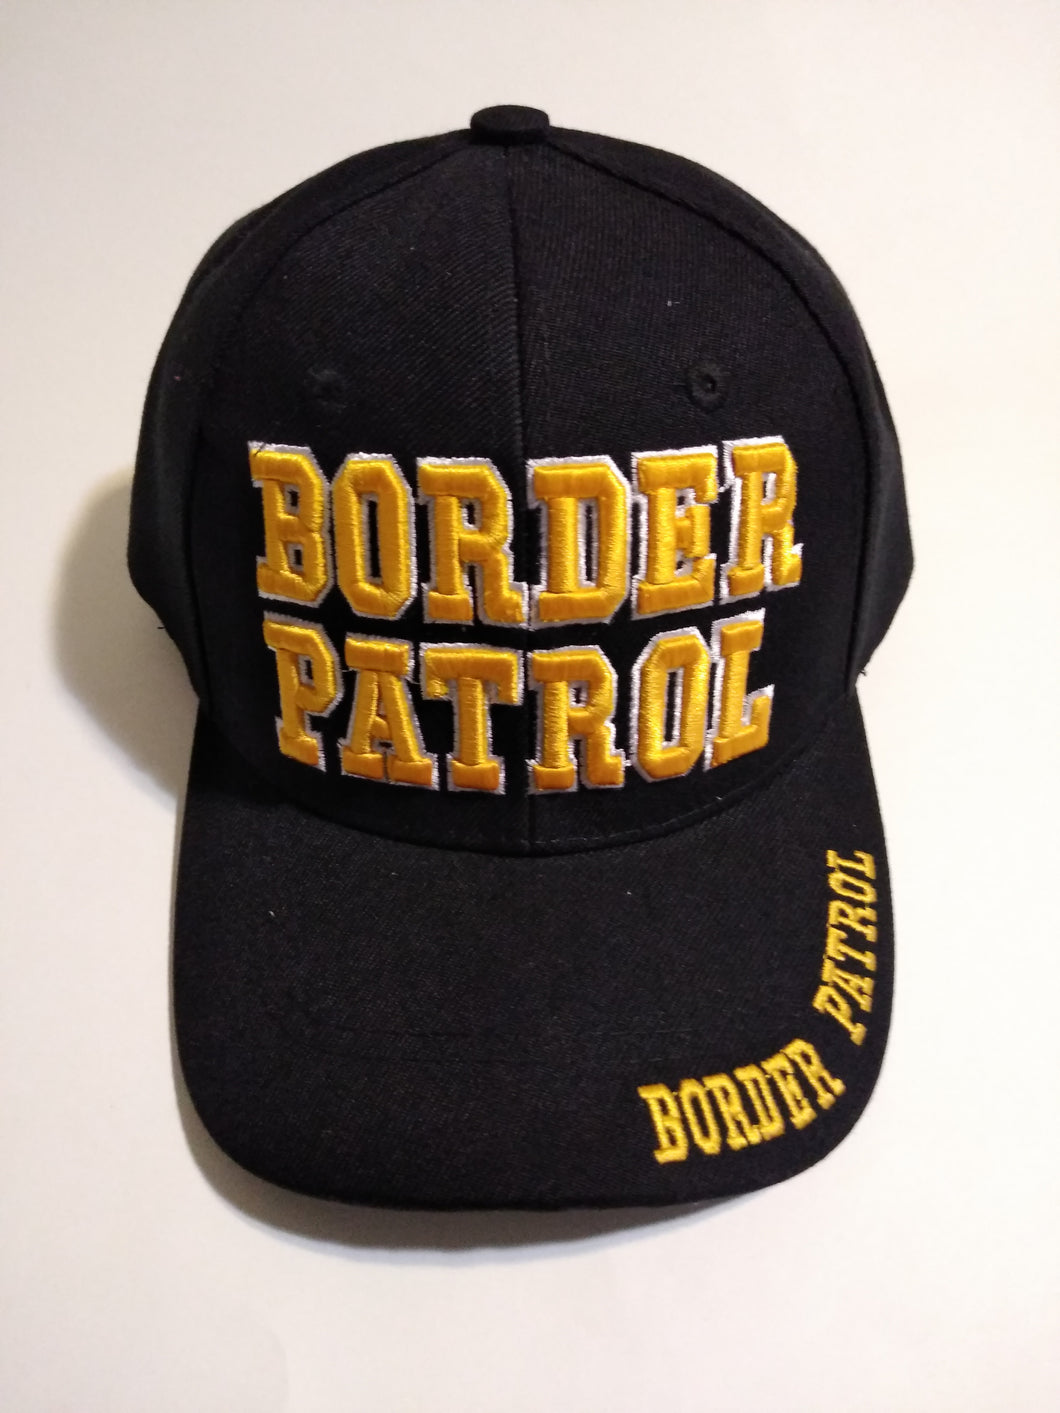 U.S Border Patrol Black With Gold Letters Embroidered Cap Hat